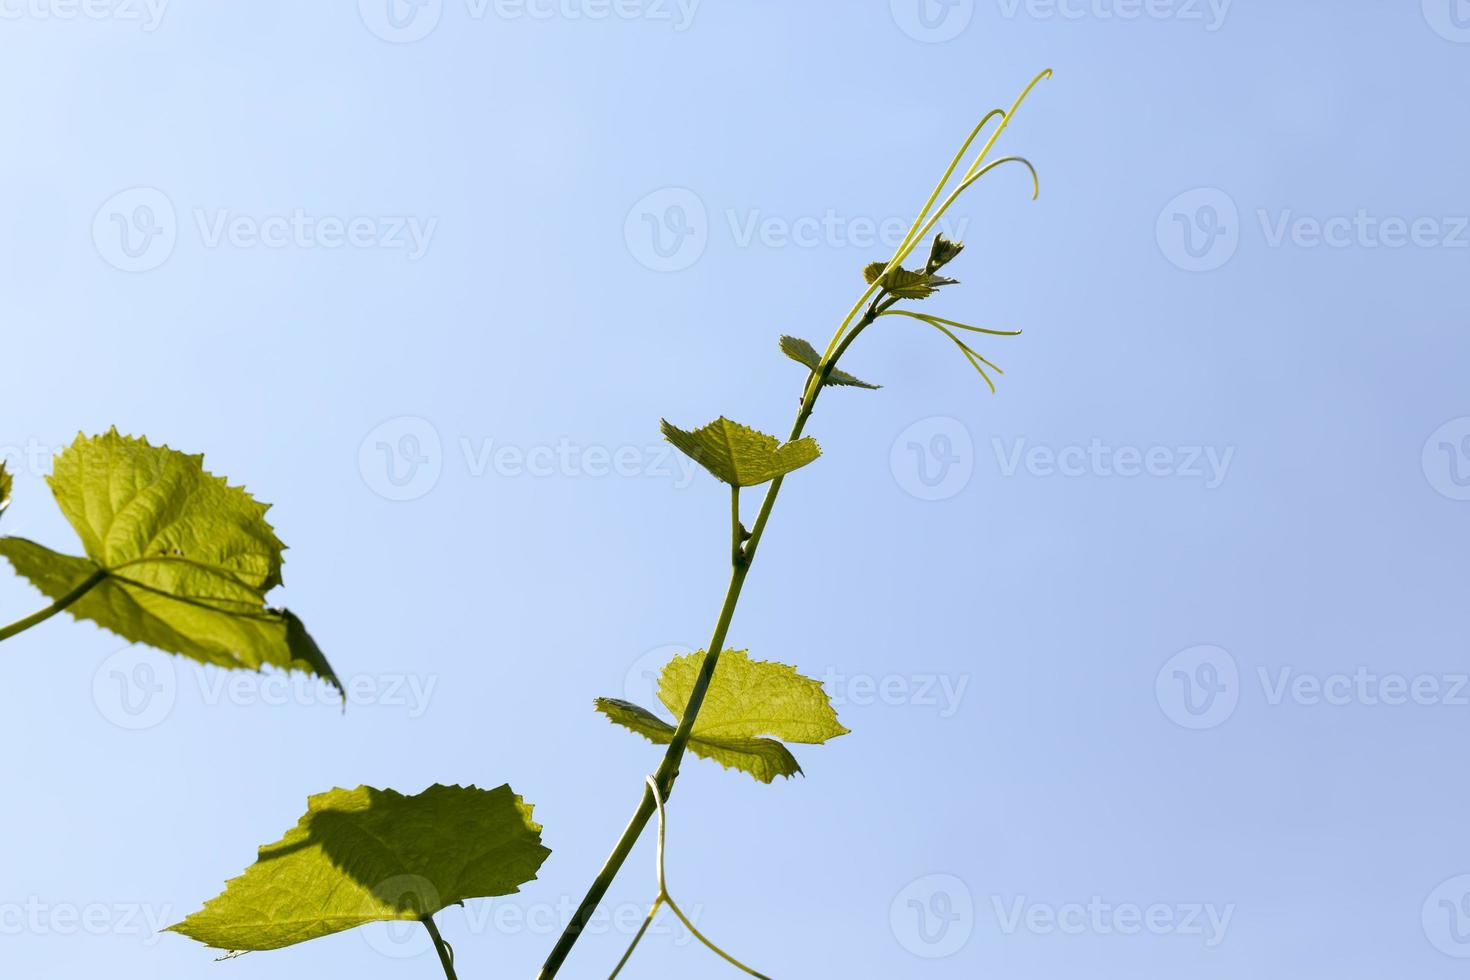 green leaves of grapes in the spring season photo